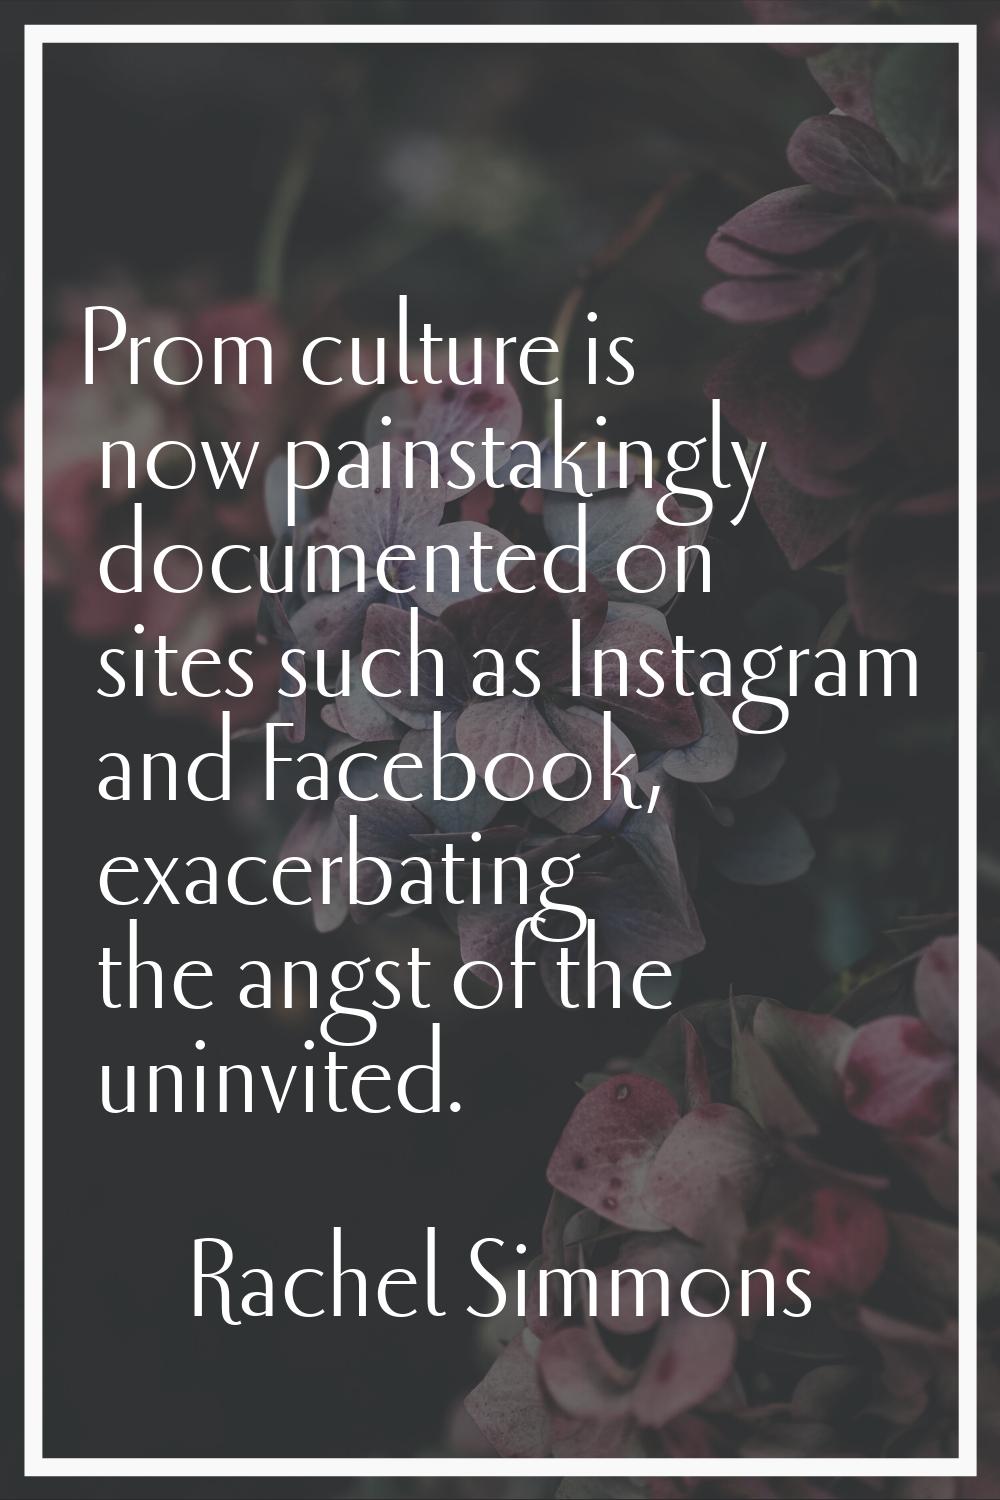 Prom culture is now painstakingly documented on sites such as Instagram and Facebook, exacerbating 